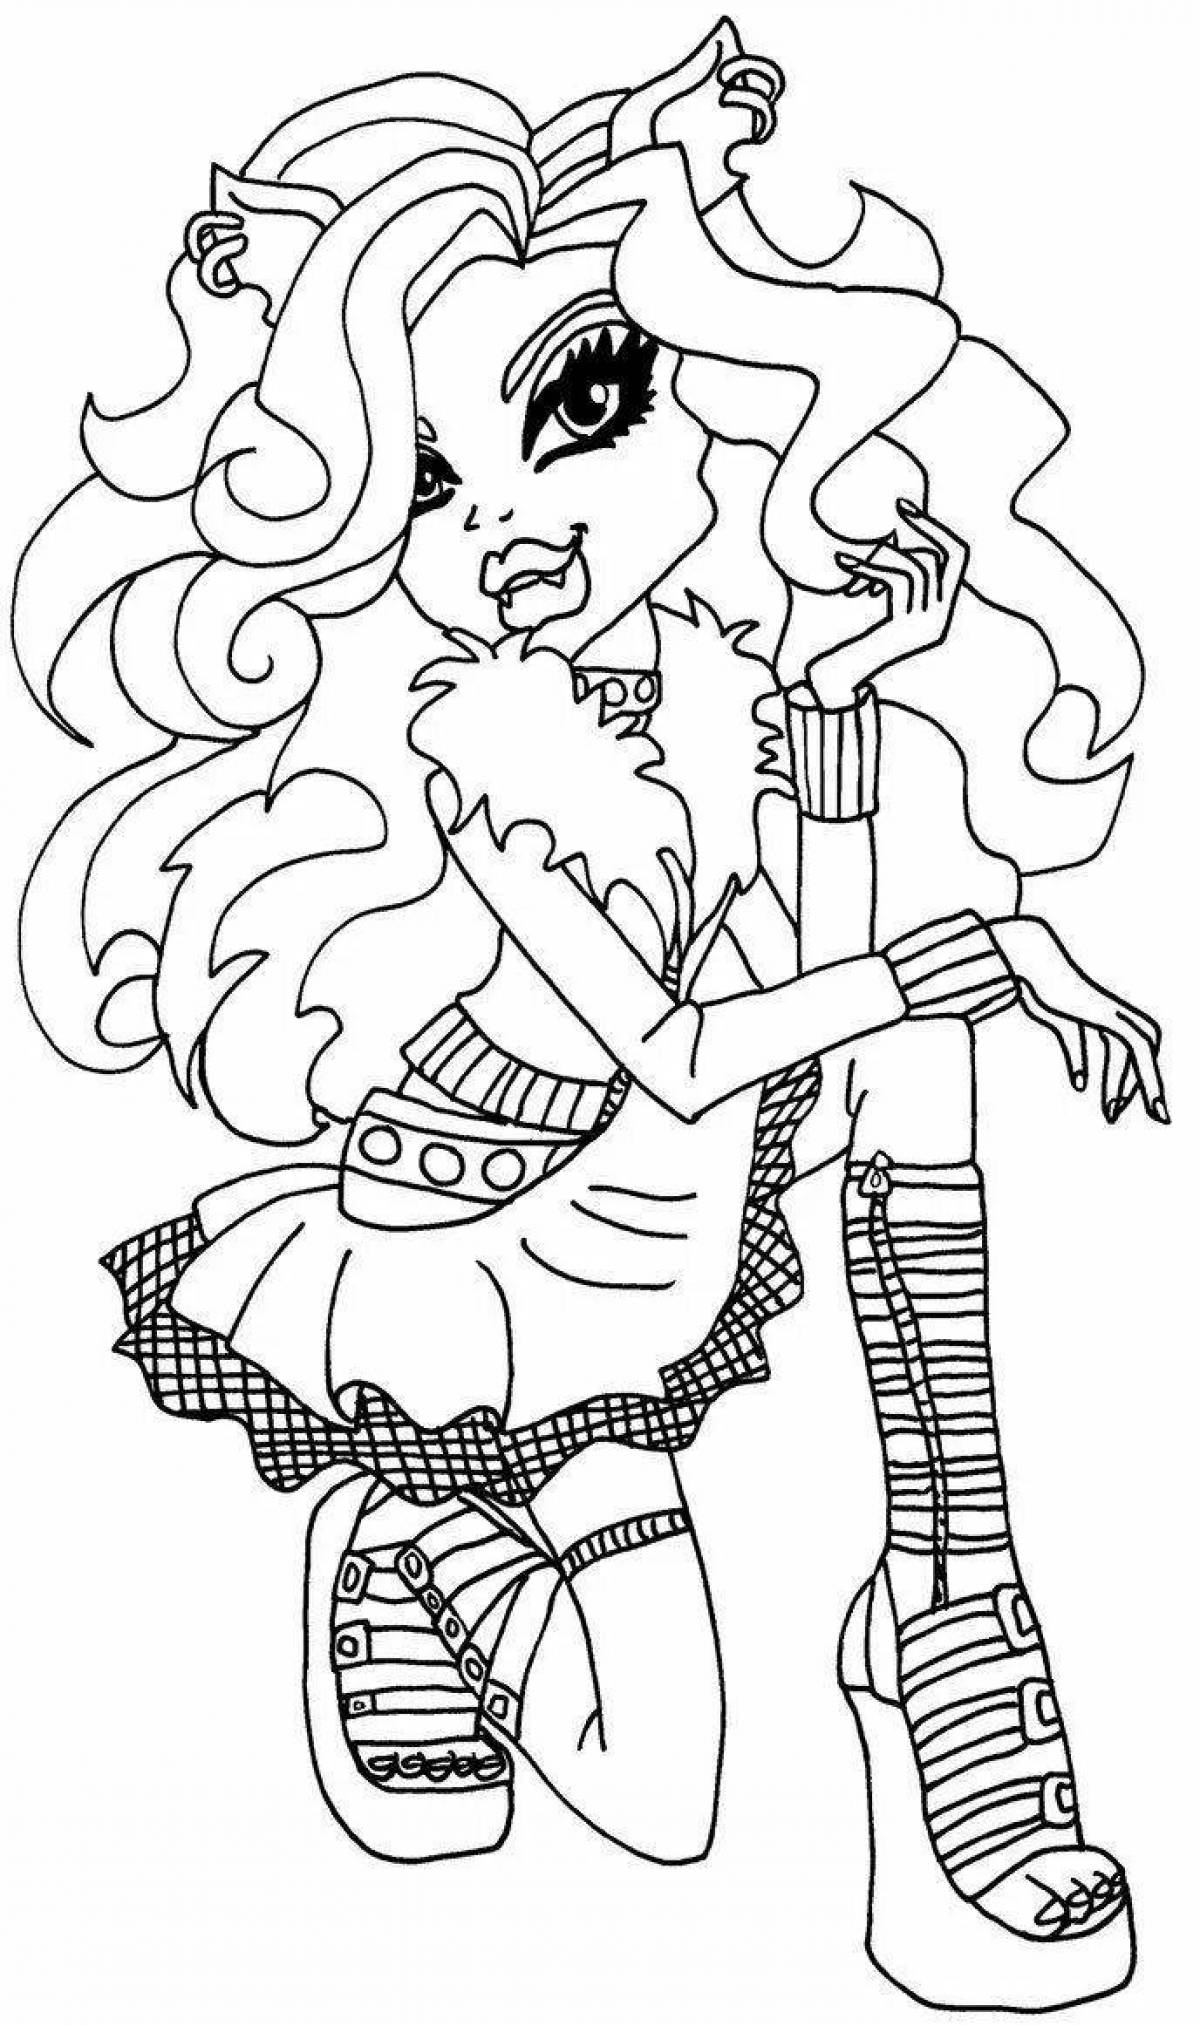 Monster high adorable coloring book